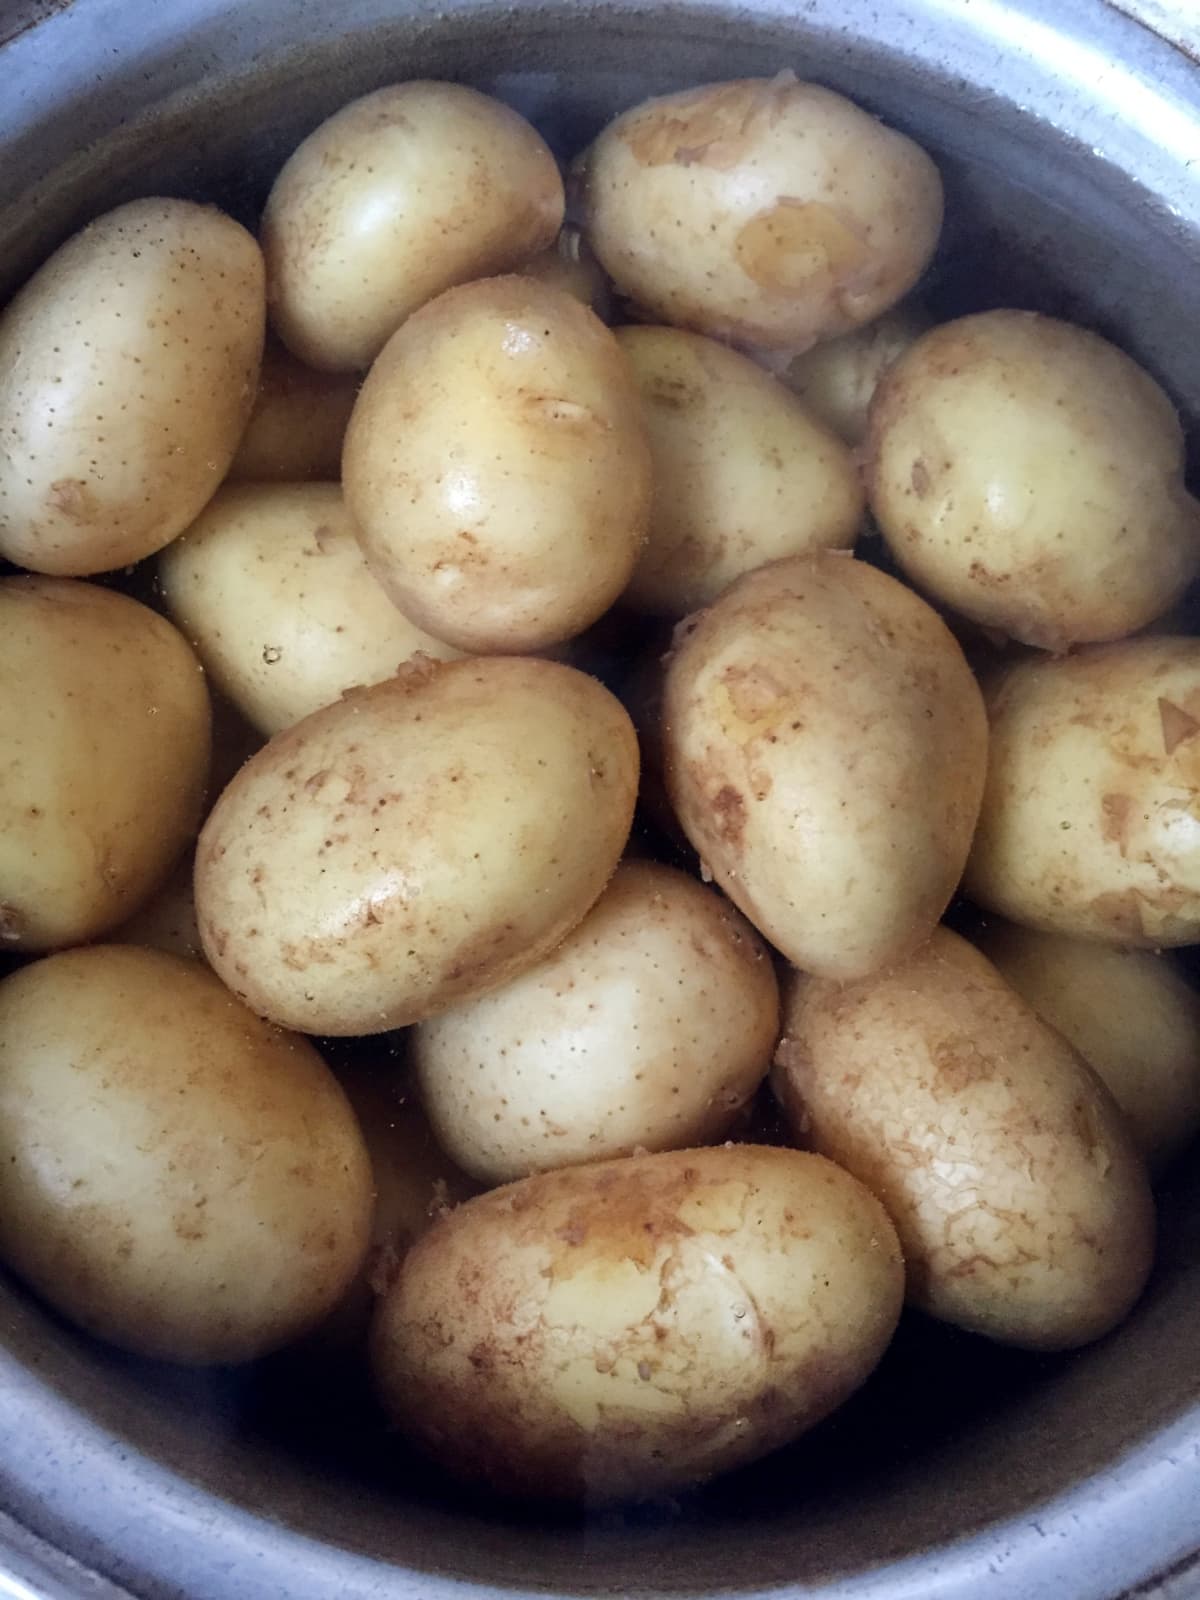 Whole potatoes boiling in water in a cooking pan